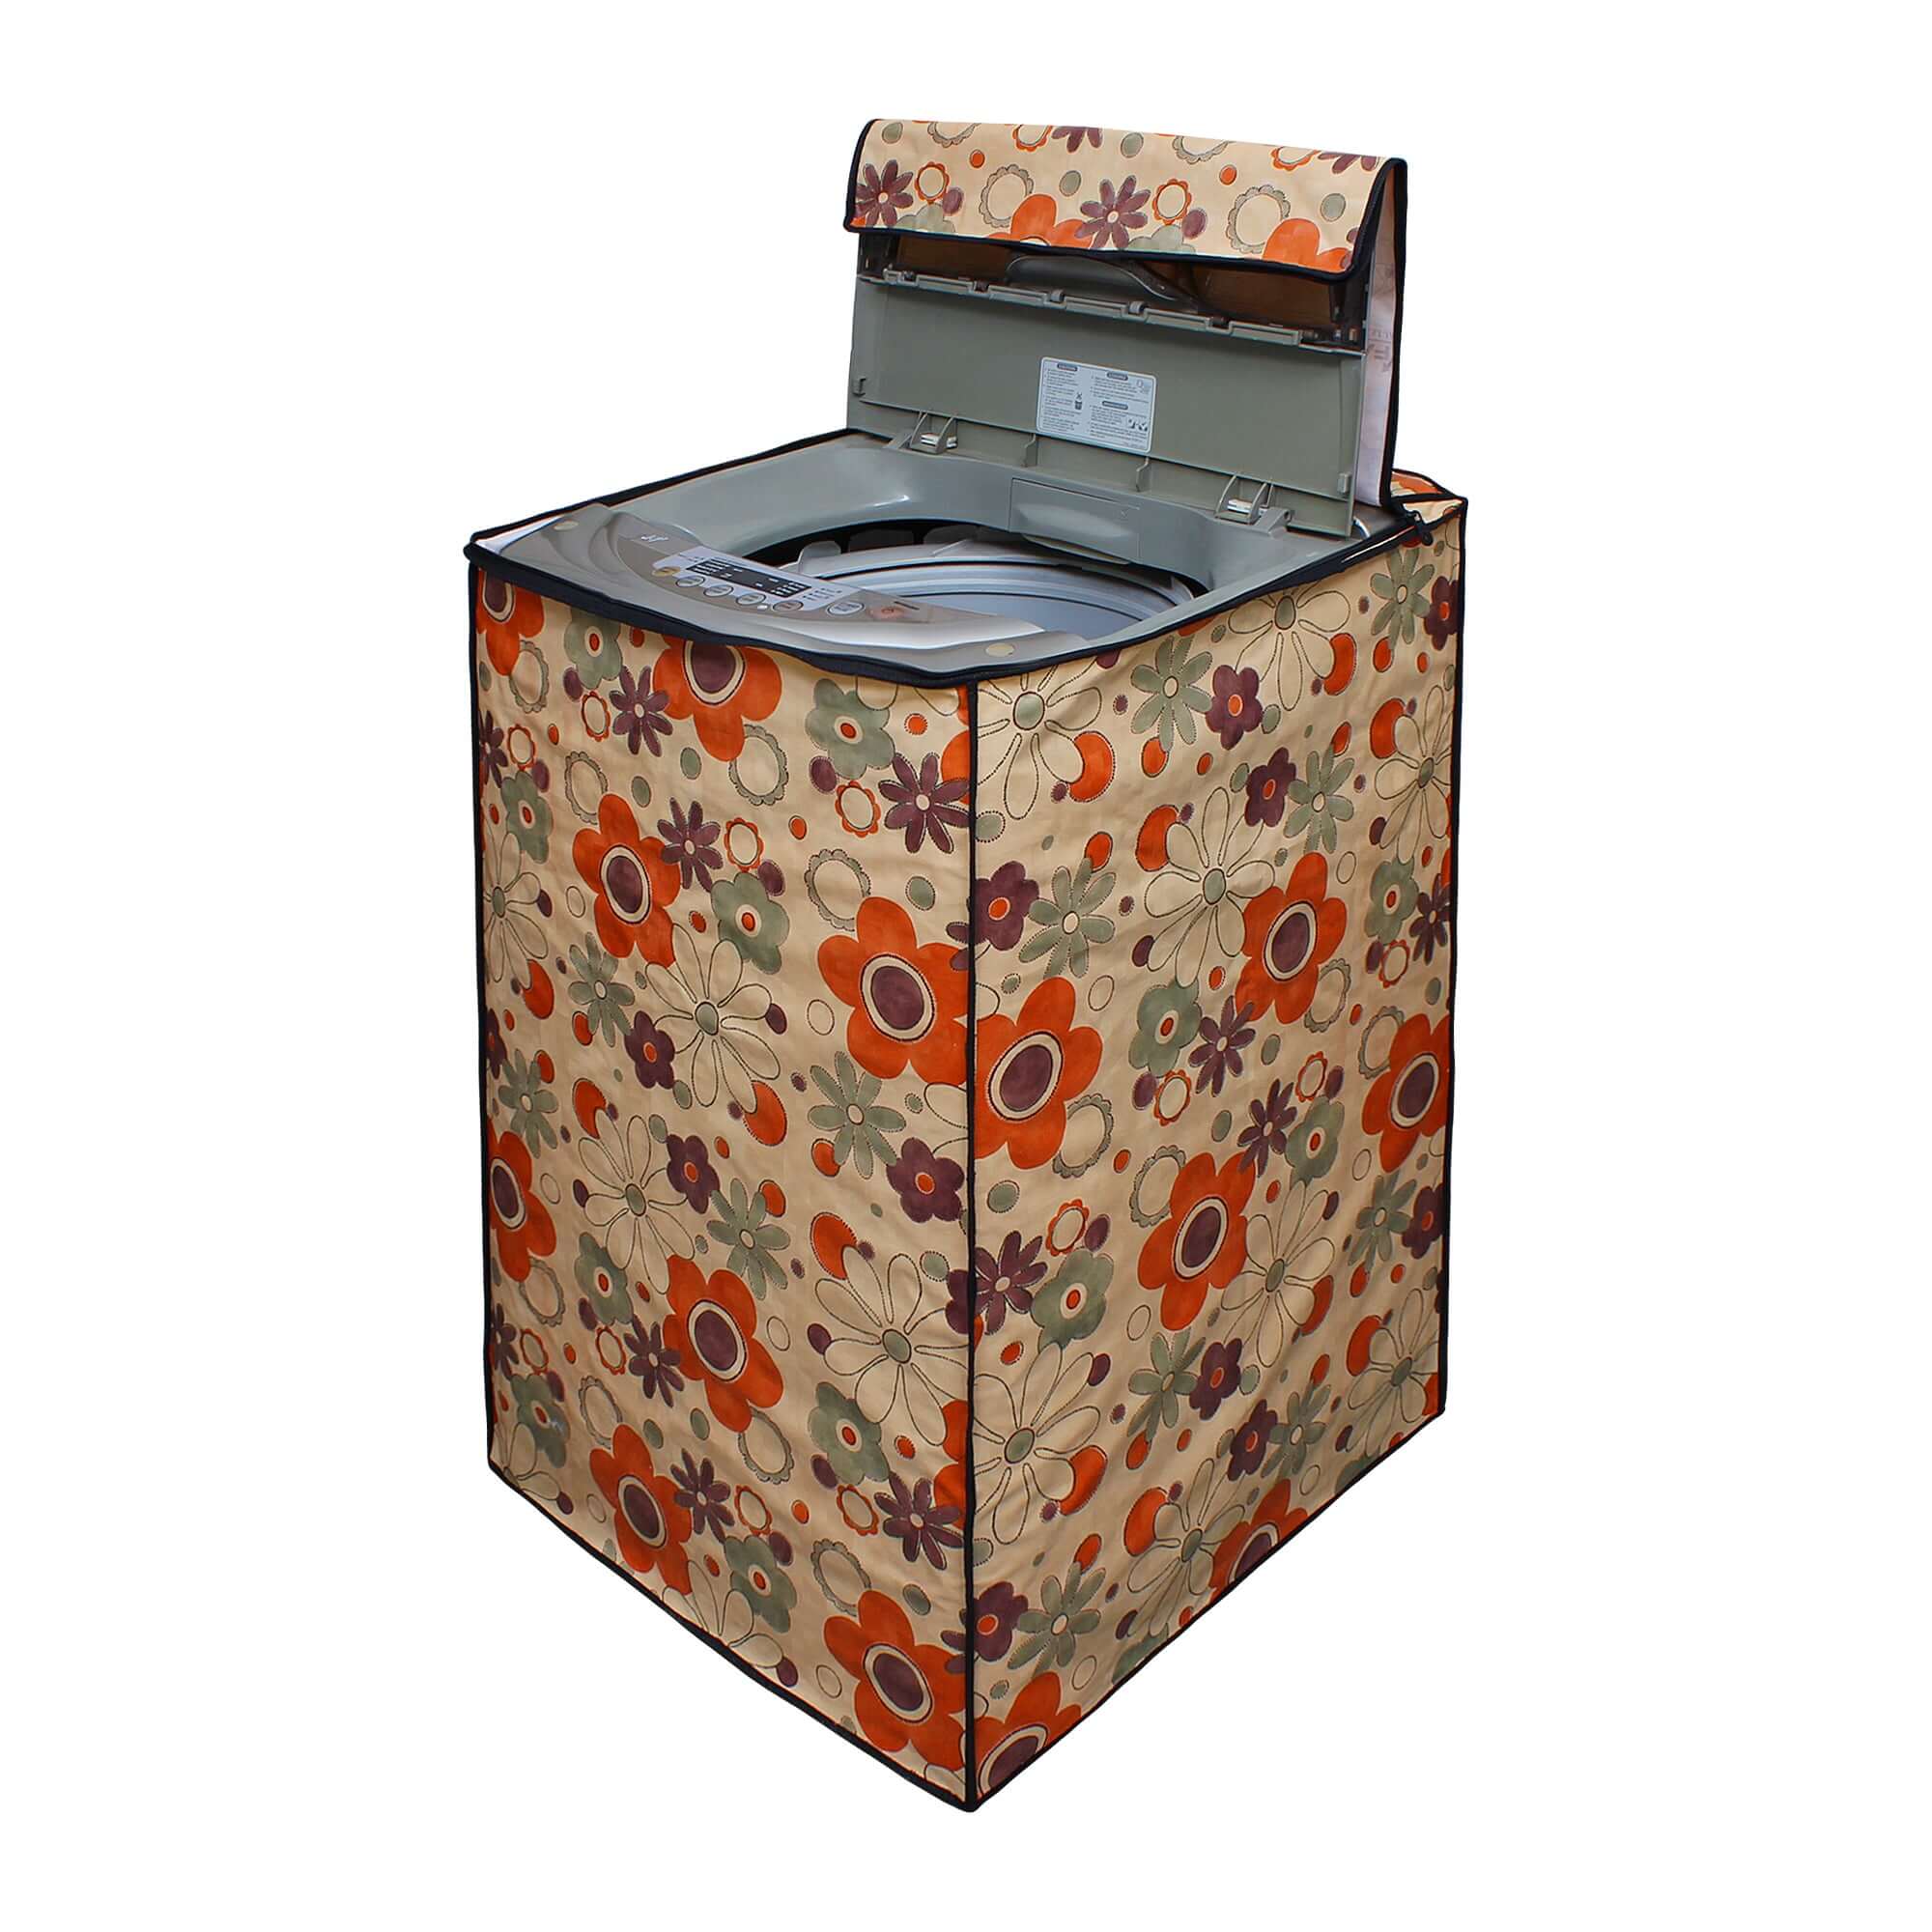 Fully Automatic Top Load Washing Machine Cover, SA68 - Dream Care Furnishings Private Limited